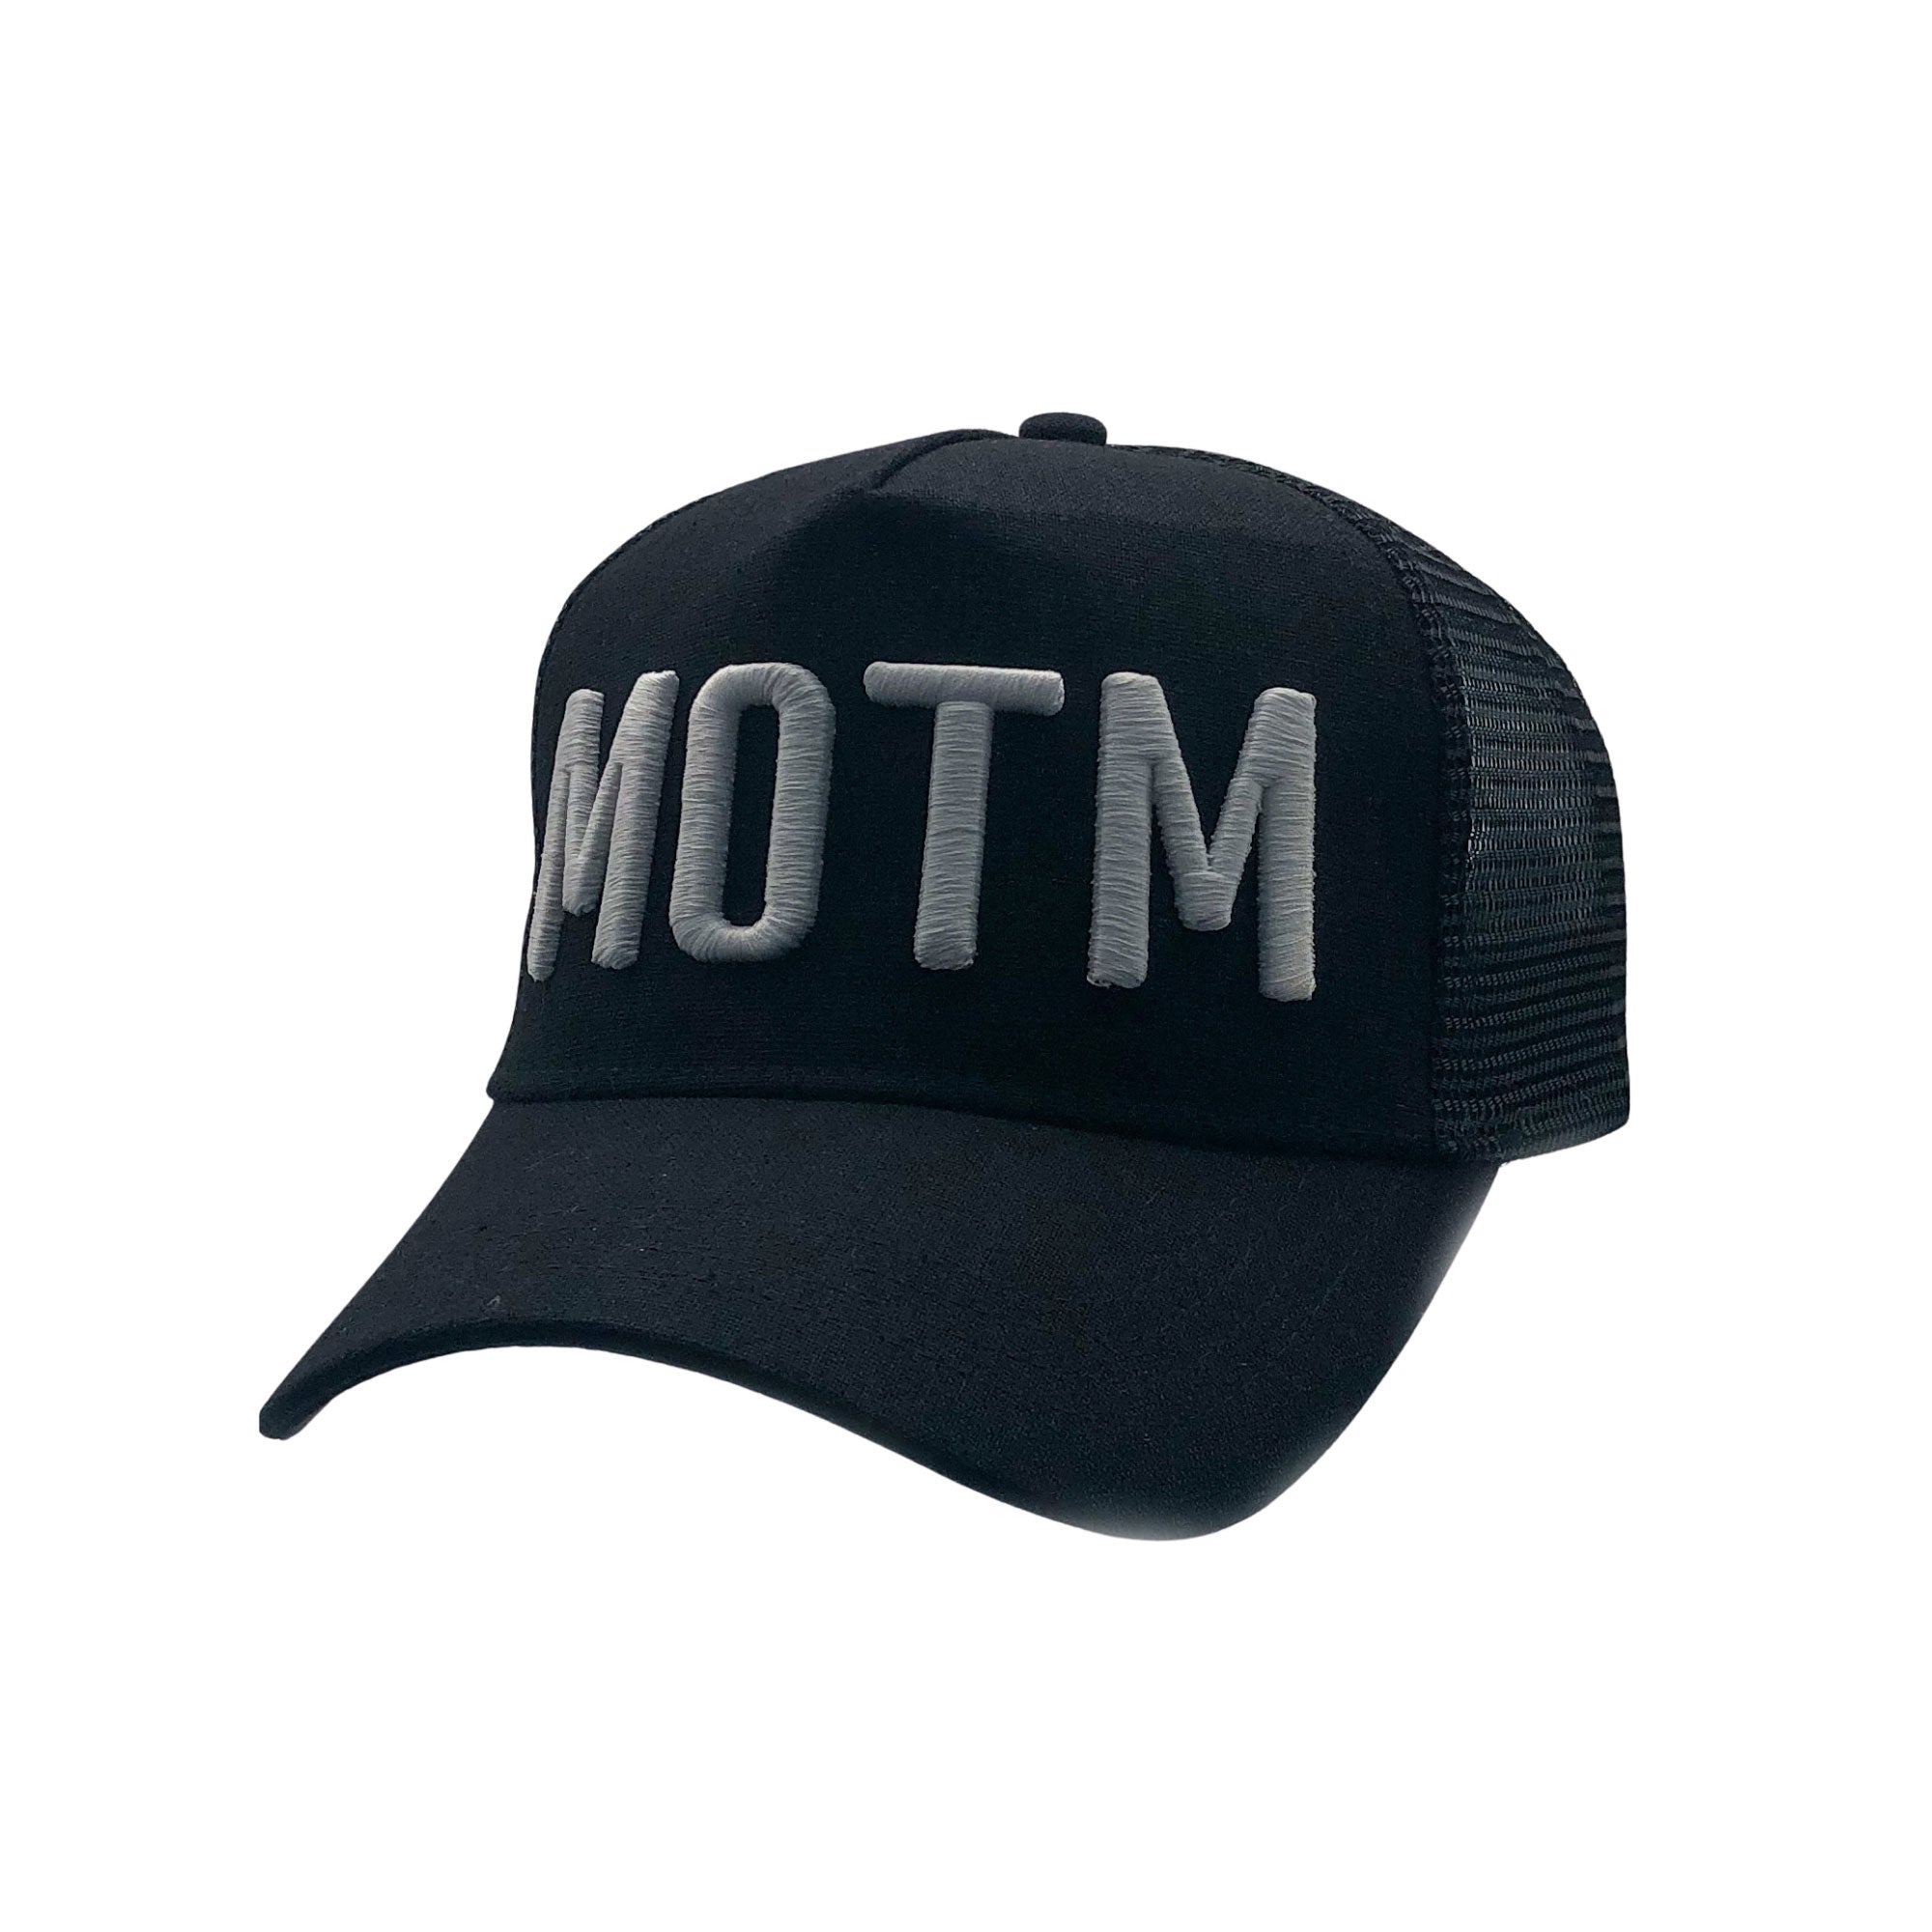 MAN OF THE MATCH® Official Cap - MOTM 3D Embroidered White on Black - Premium Linen